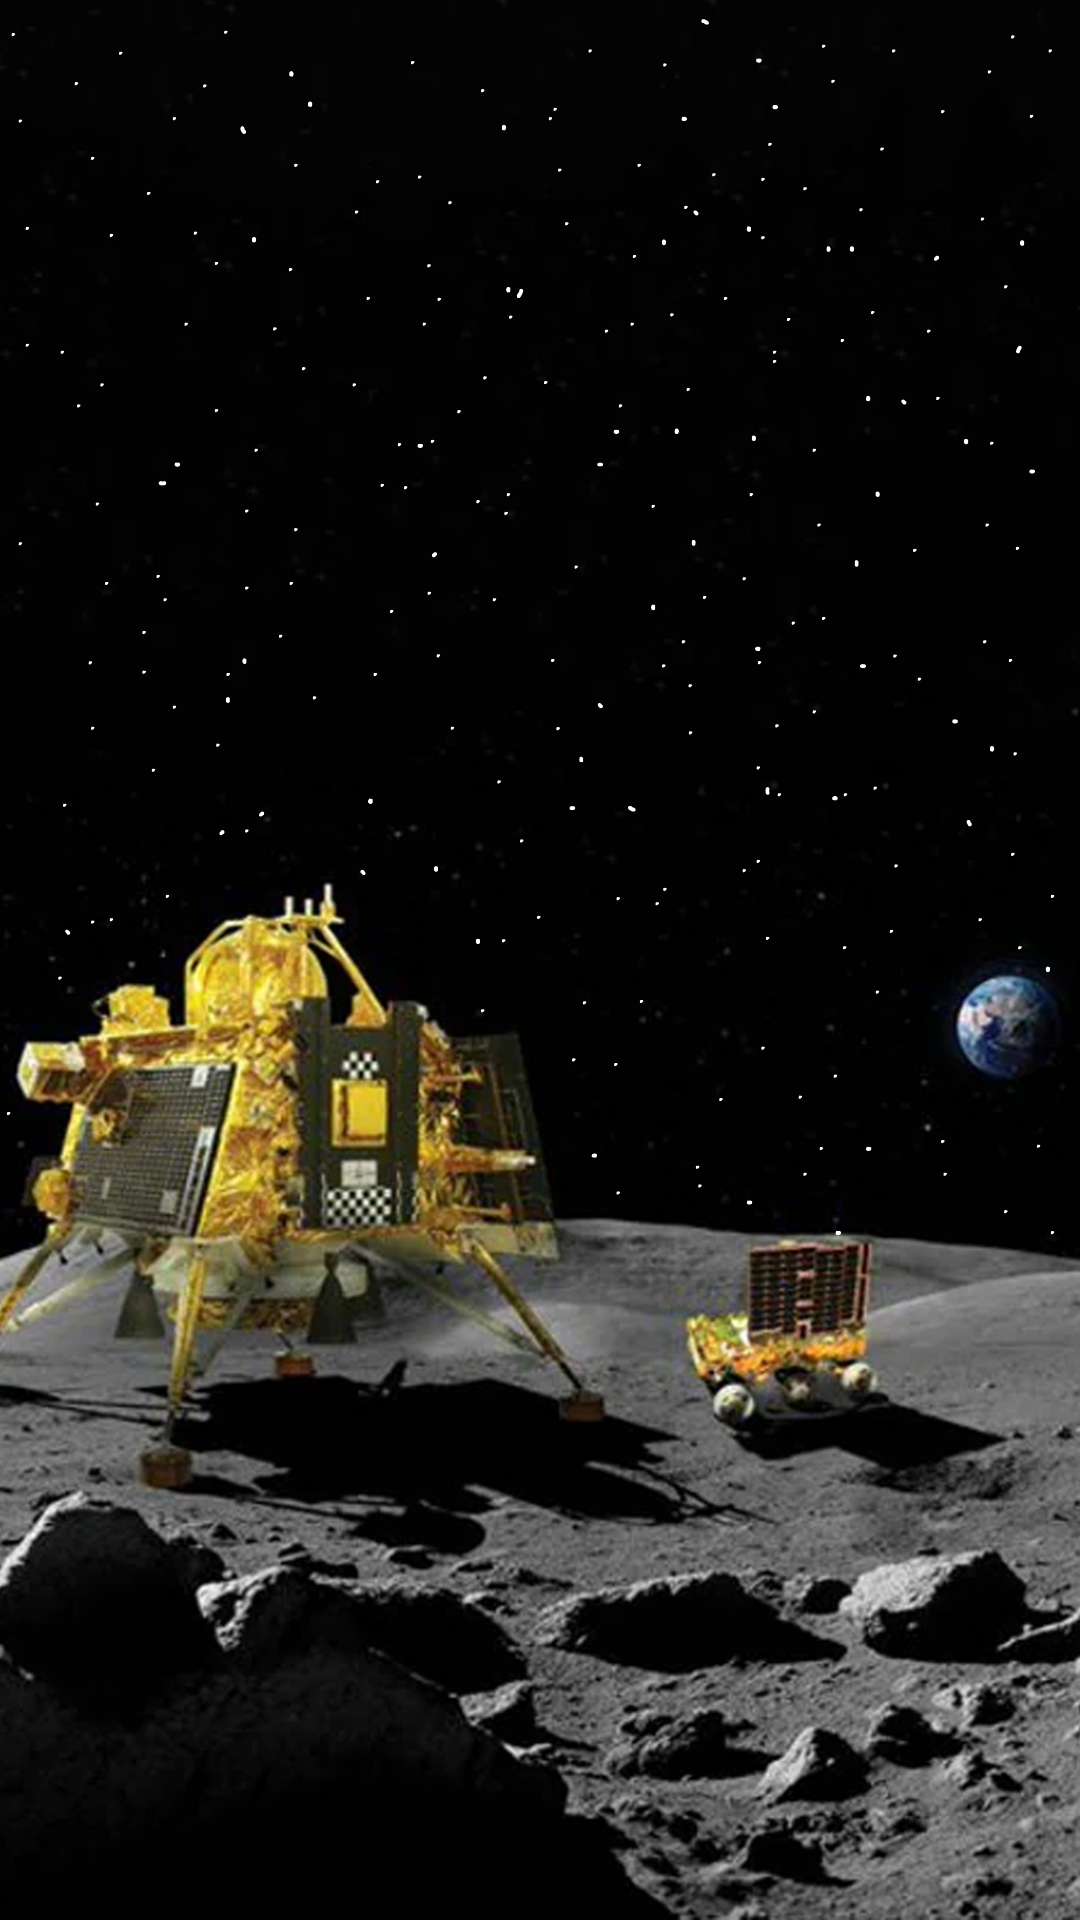 India's Chandrayaan-2 Spacecraft Scouts the Moon in New Lunar Photos | Space